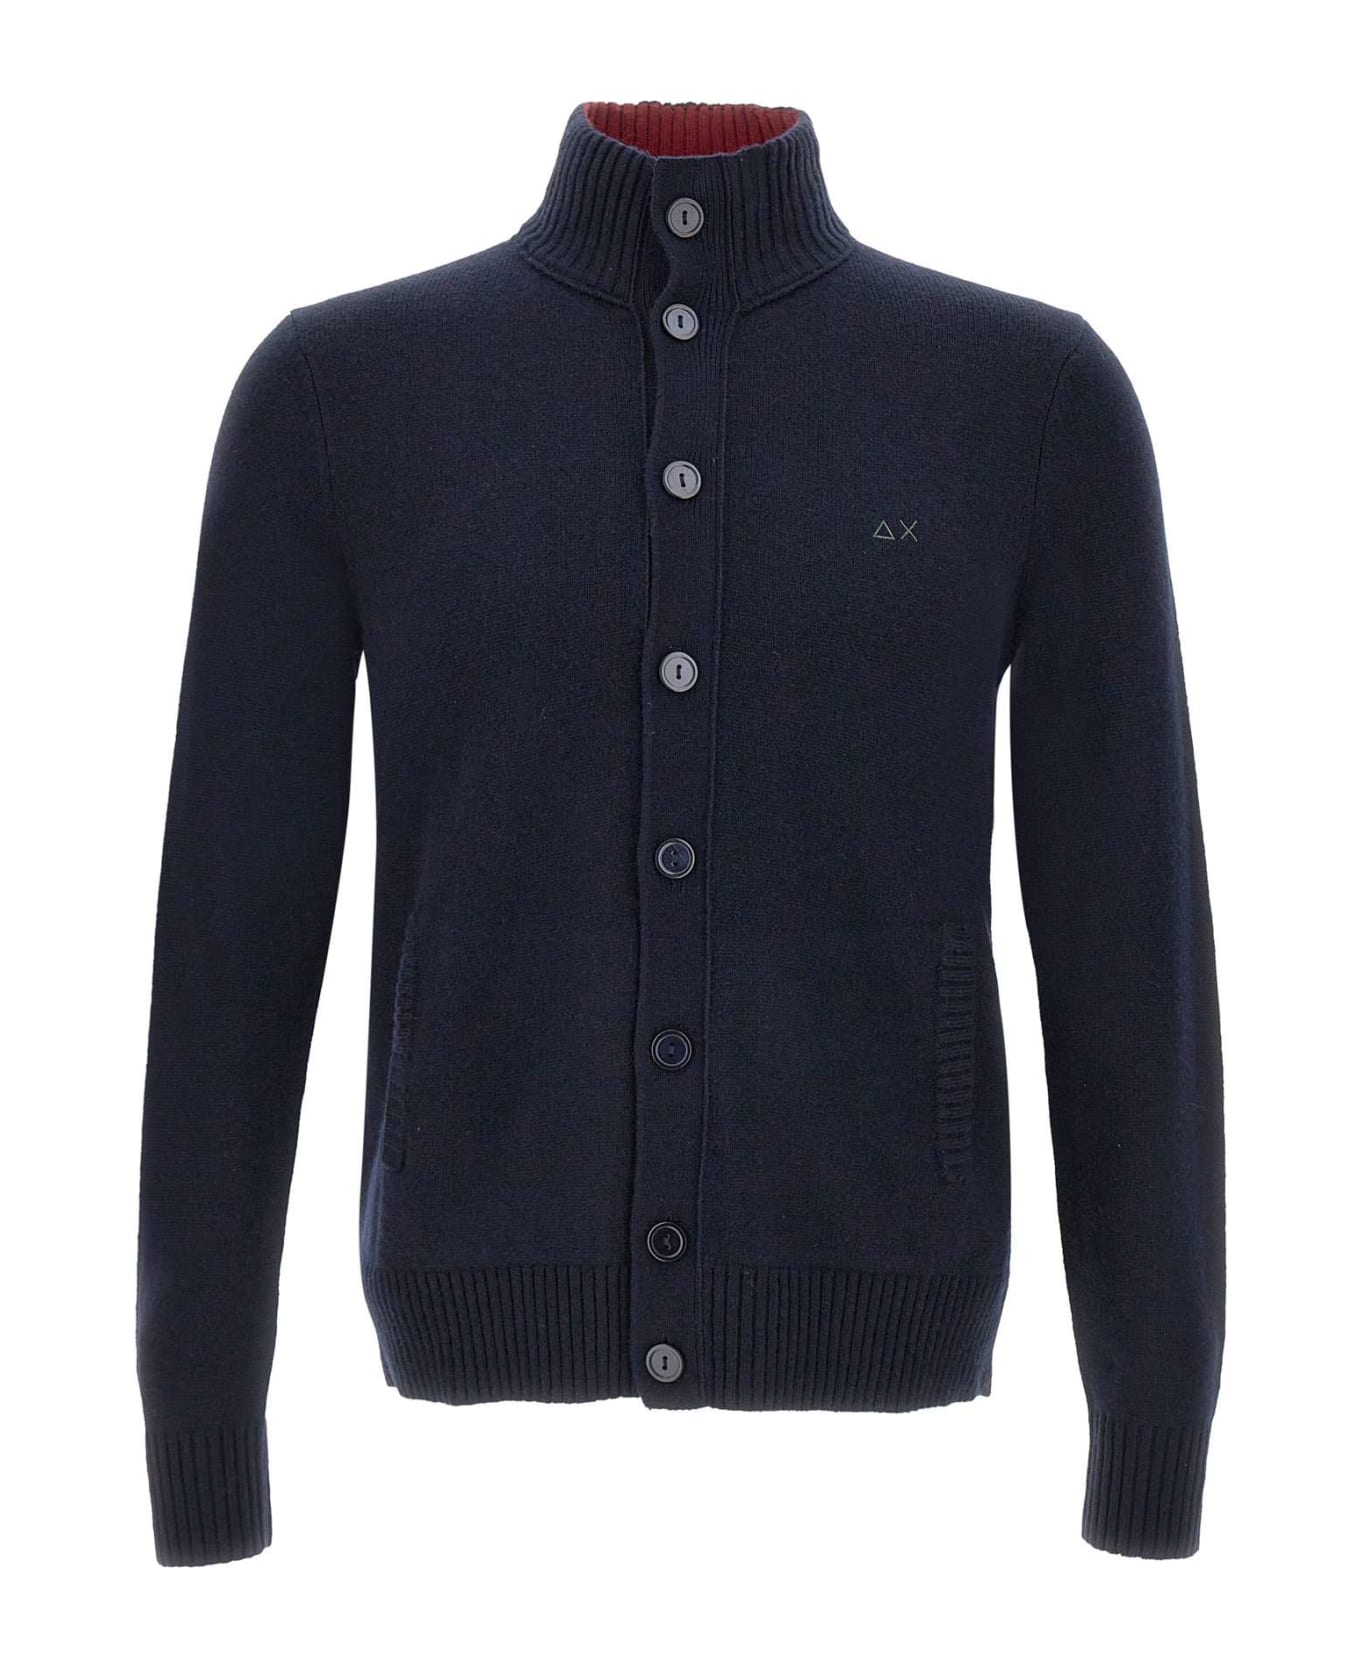 Sun 68 'solid Color' Wool, Viscose And Cashmere Cardigan Cardigan - NAVY BLUE